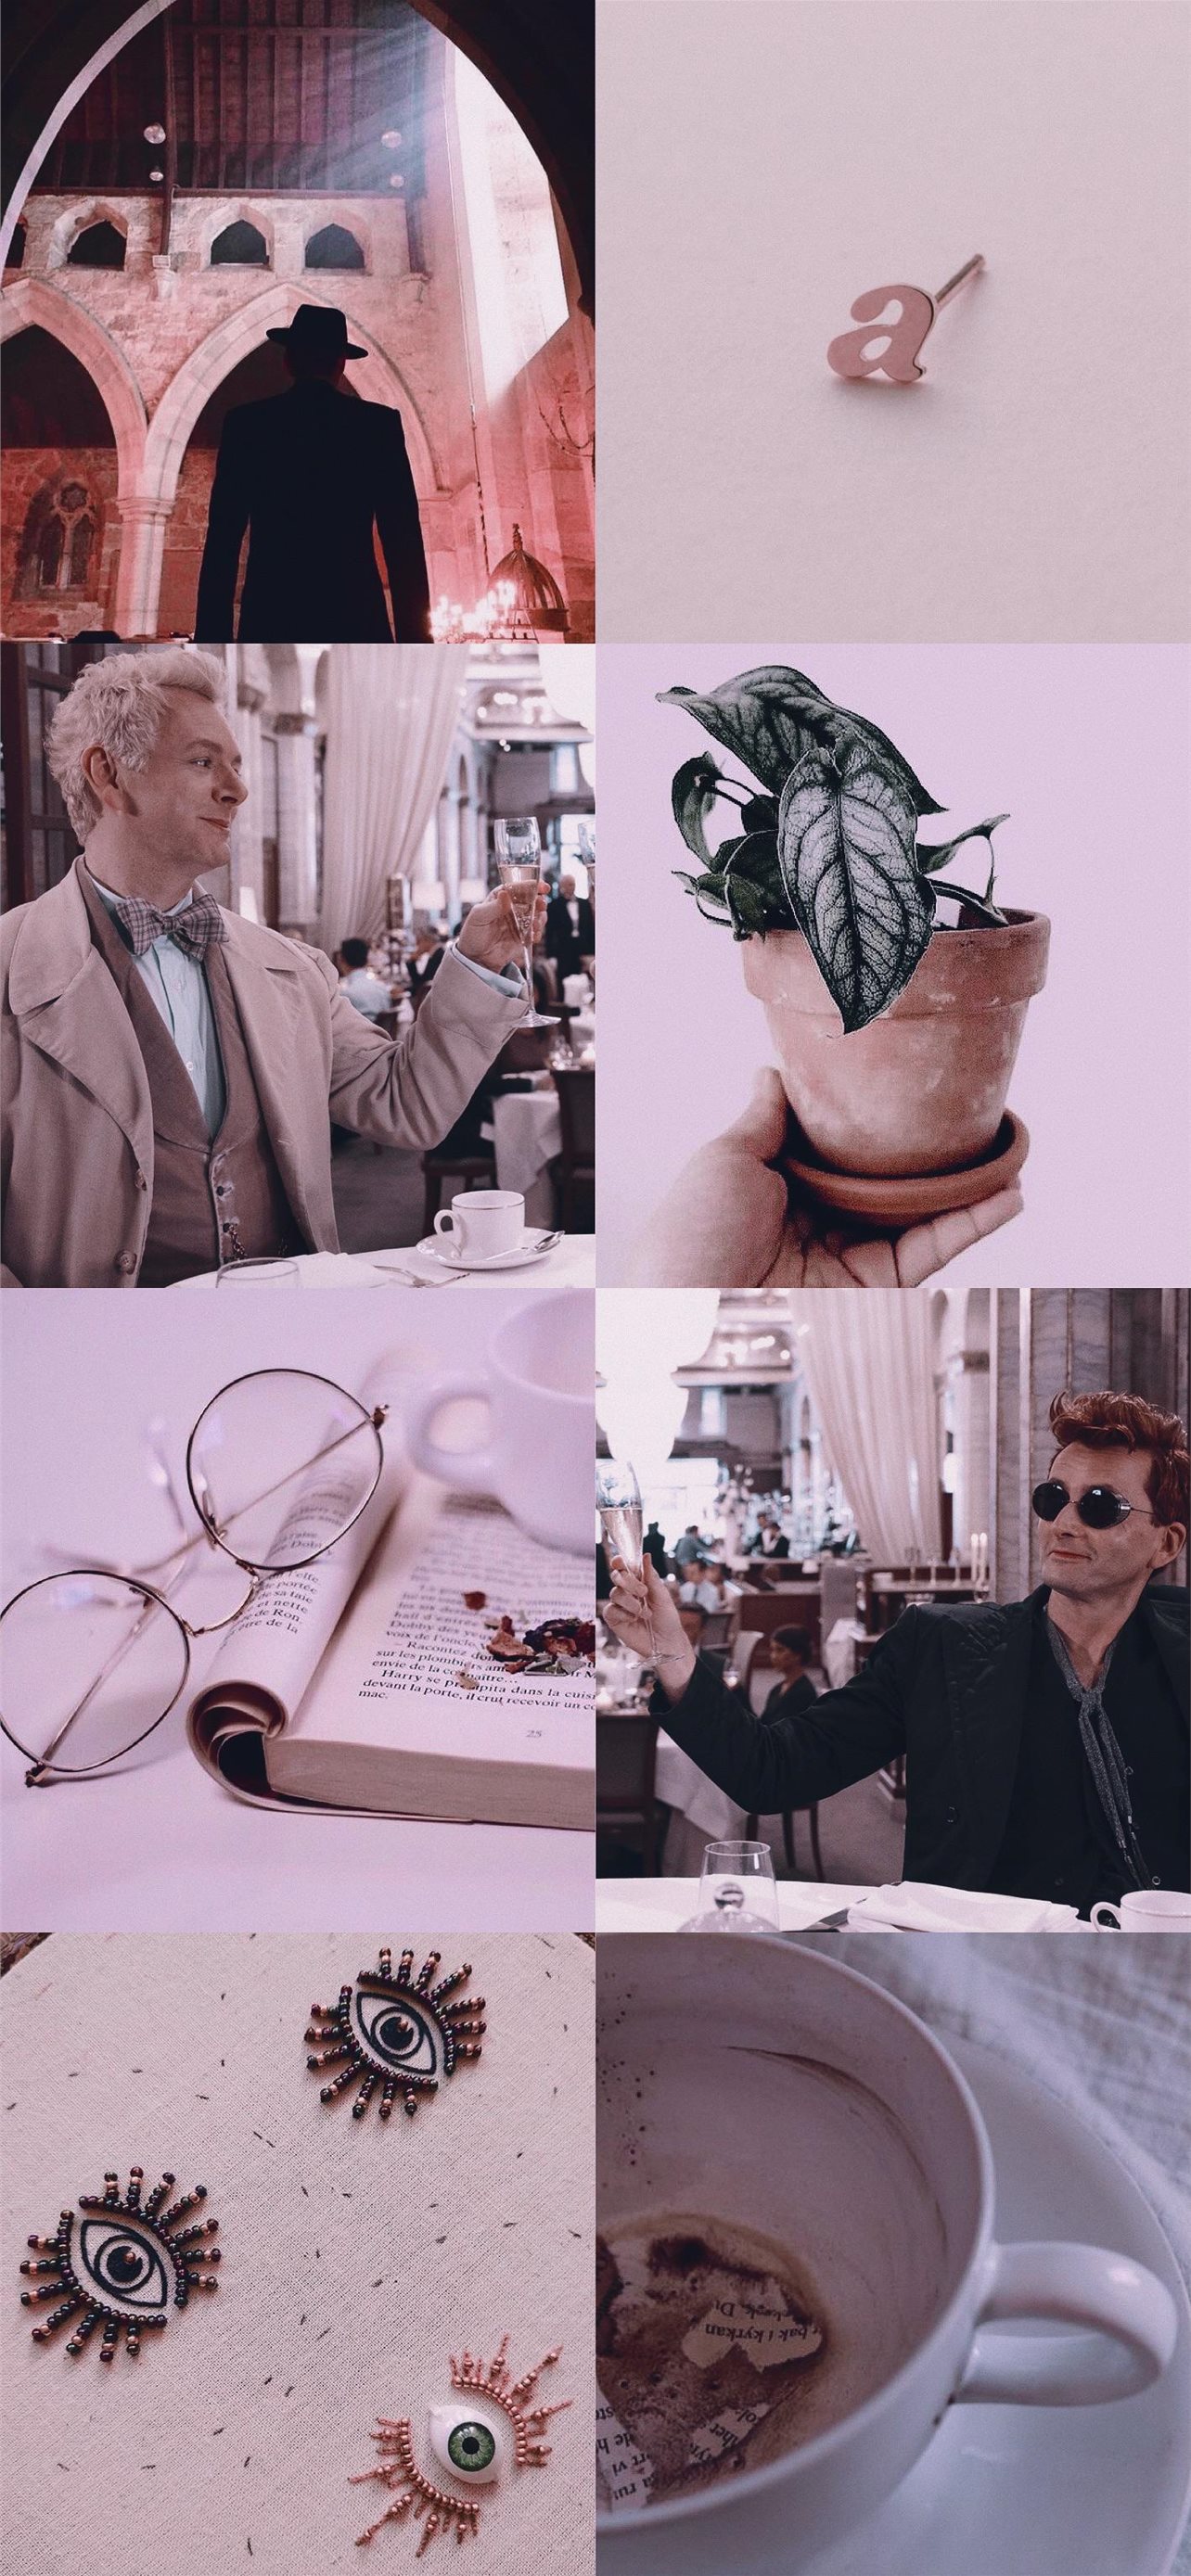 Wallpaper Your Life With This Roundup of GOOD OMENS Art